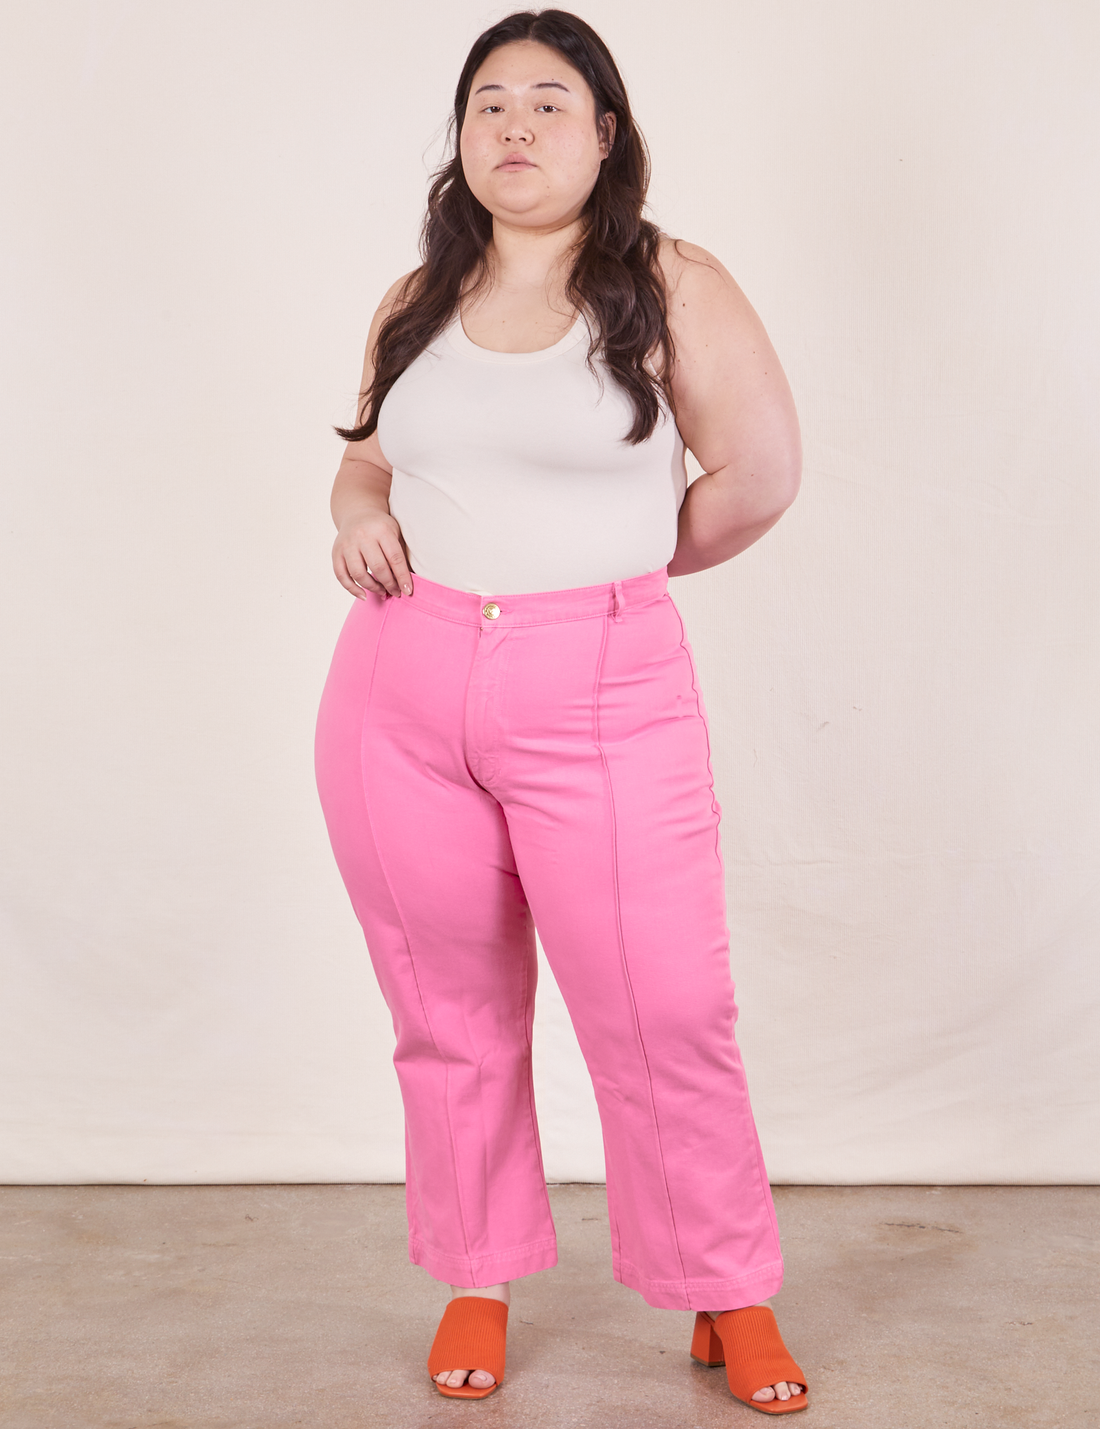 Ashley is 5'7" and wearing size 1XL Western Pants in Bubblegum Pink paired with vintage off-white Tank Top